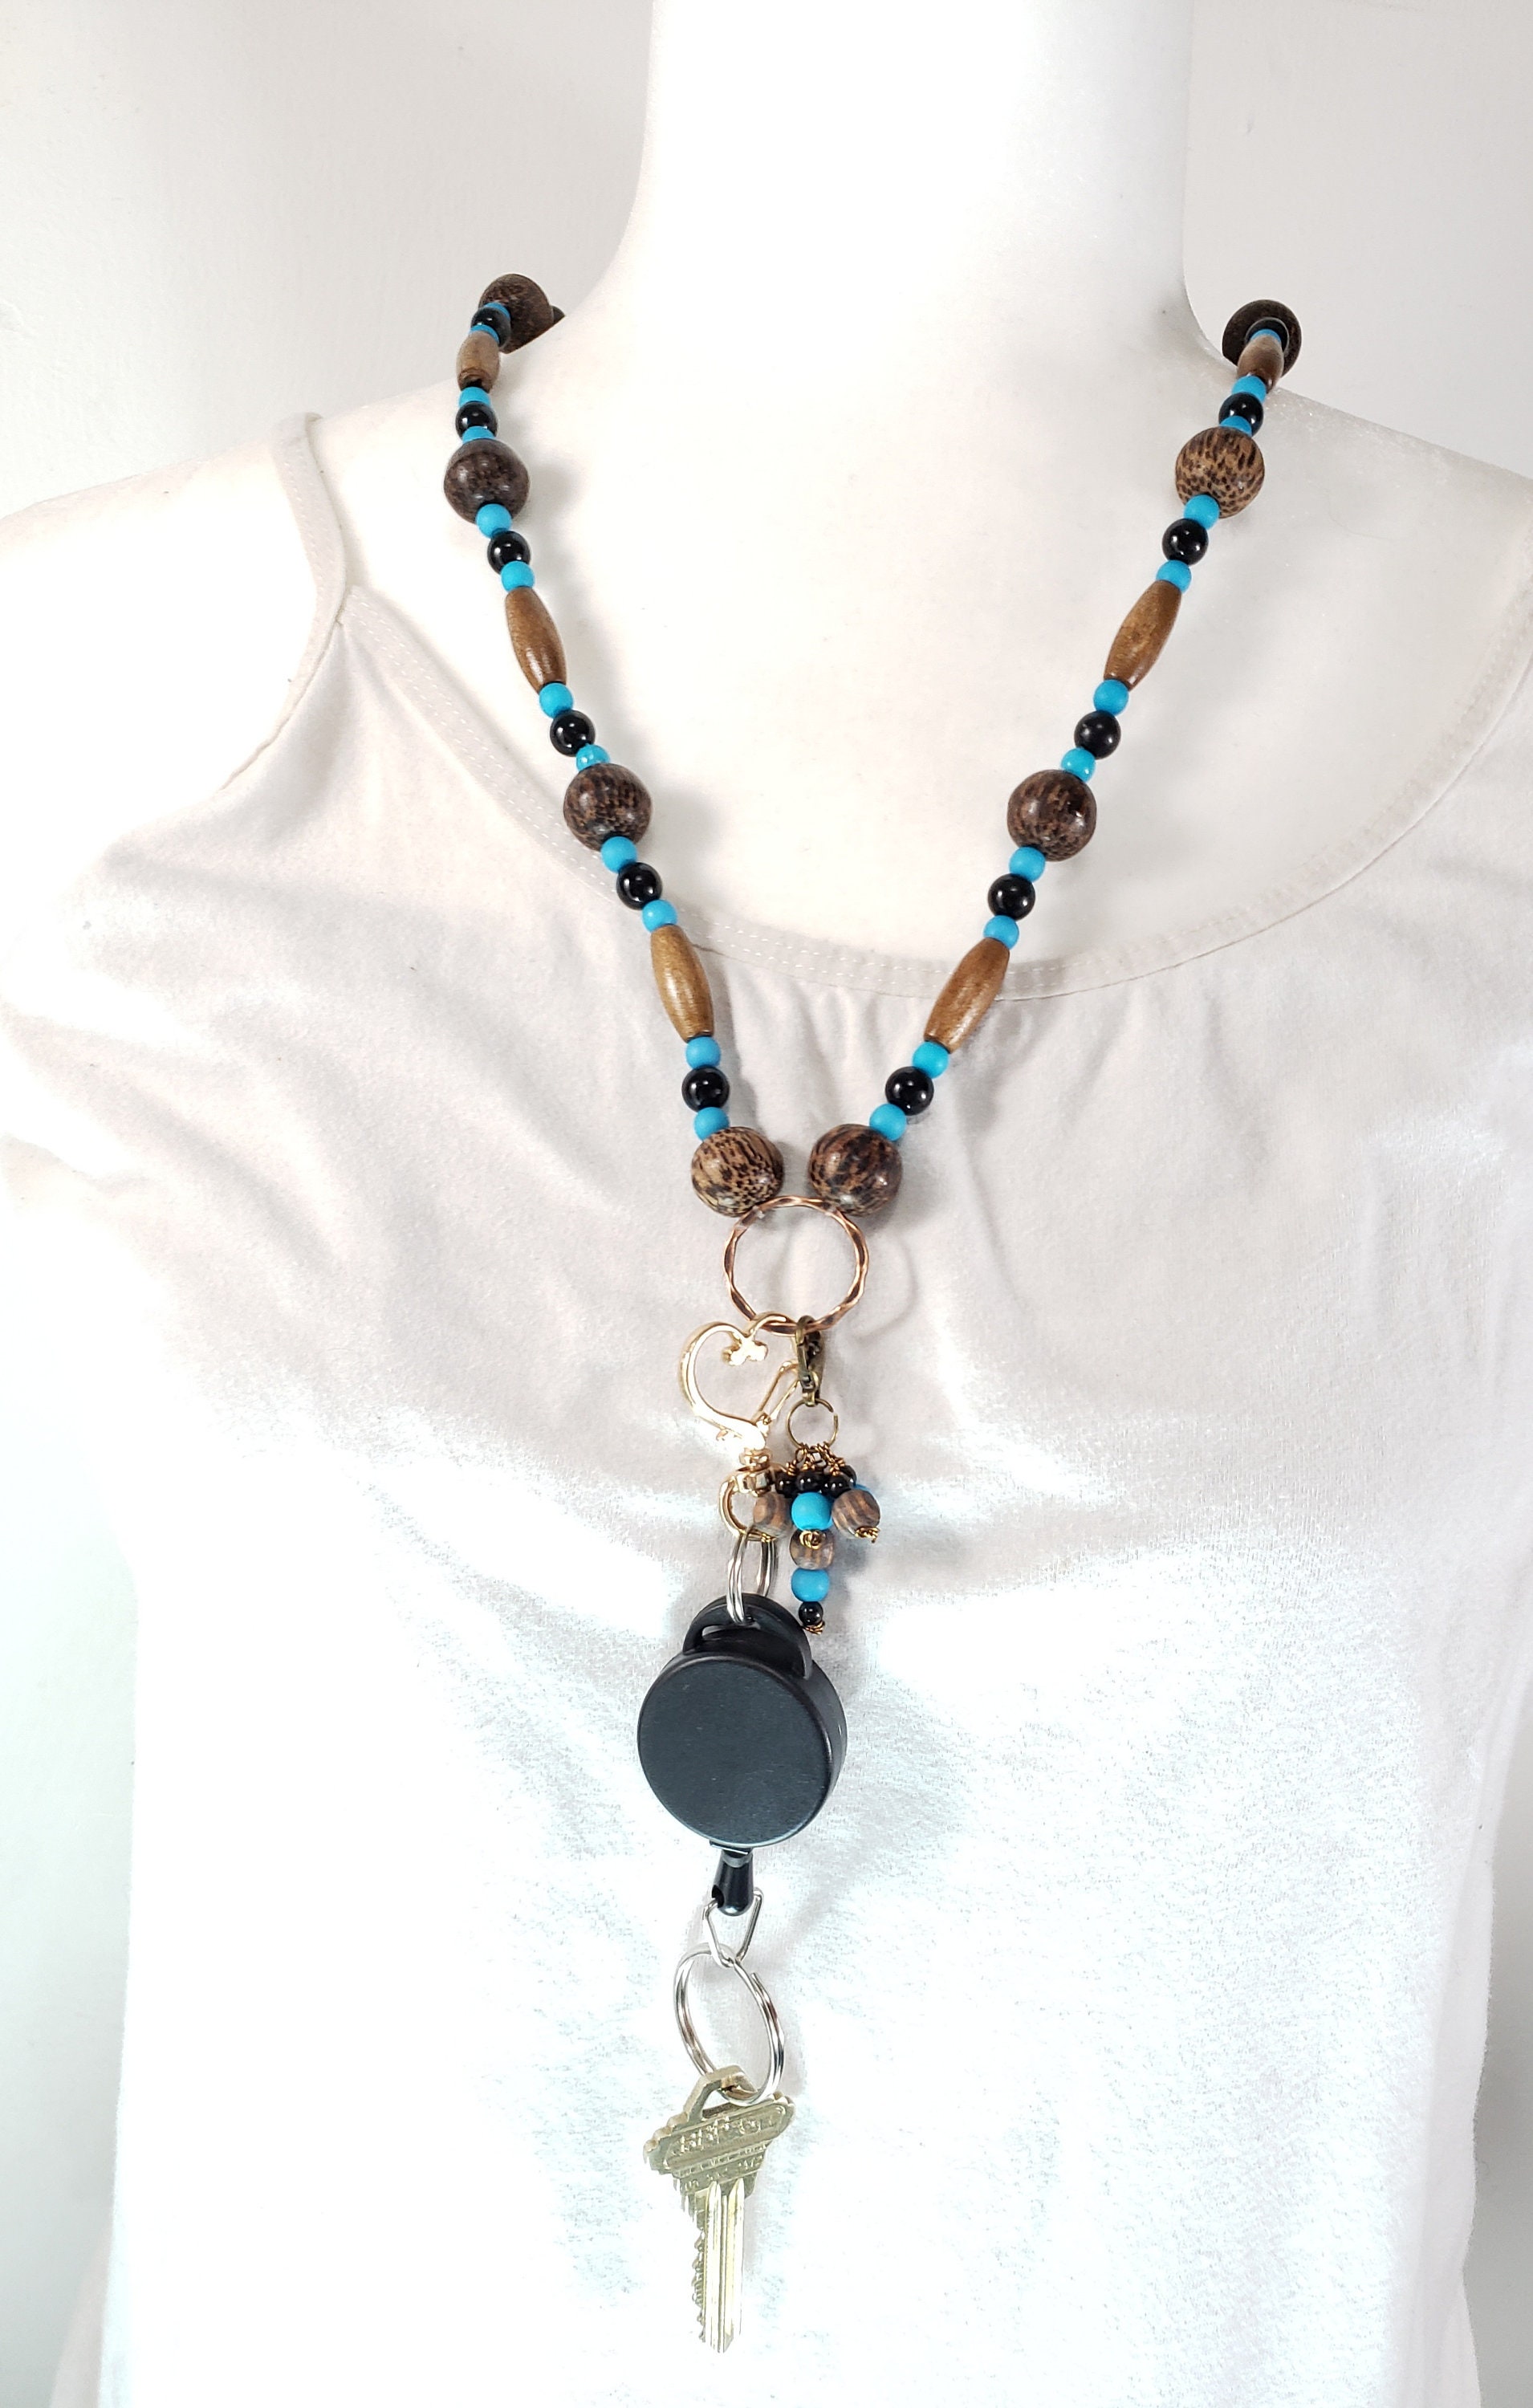 eyeglass chain necklace with charm 3 in 1 beaded lanyard Beautiful multi purpose necklace with retractable reel included